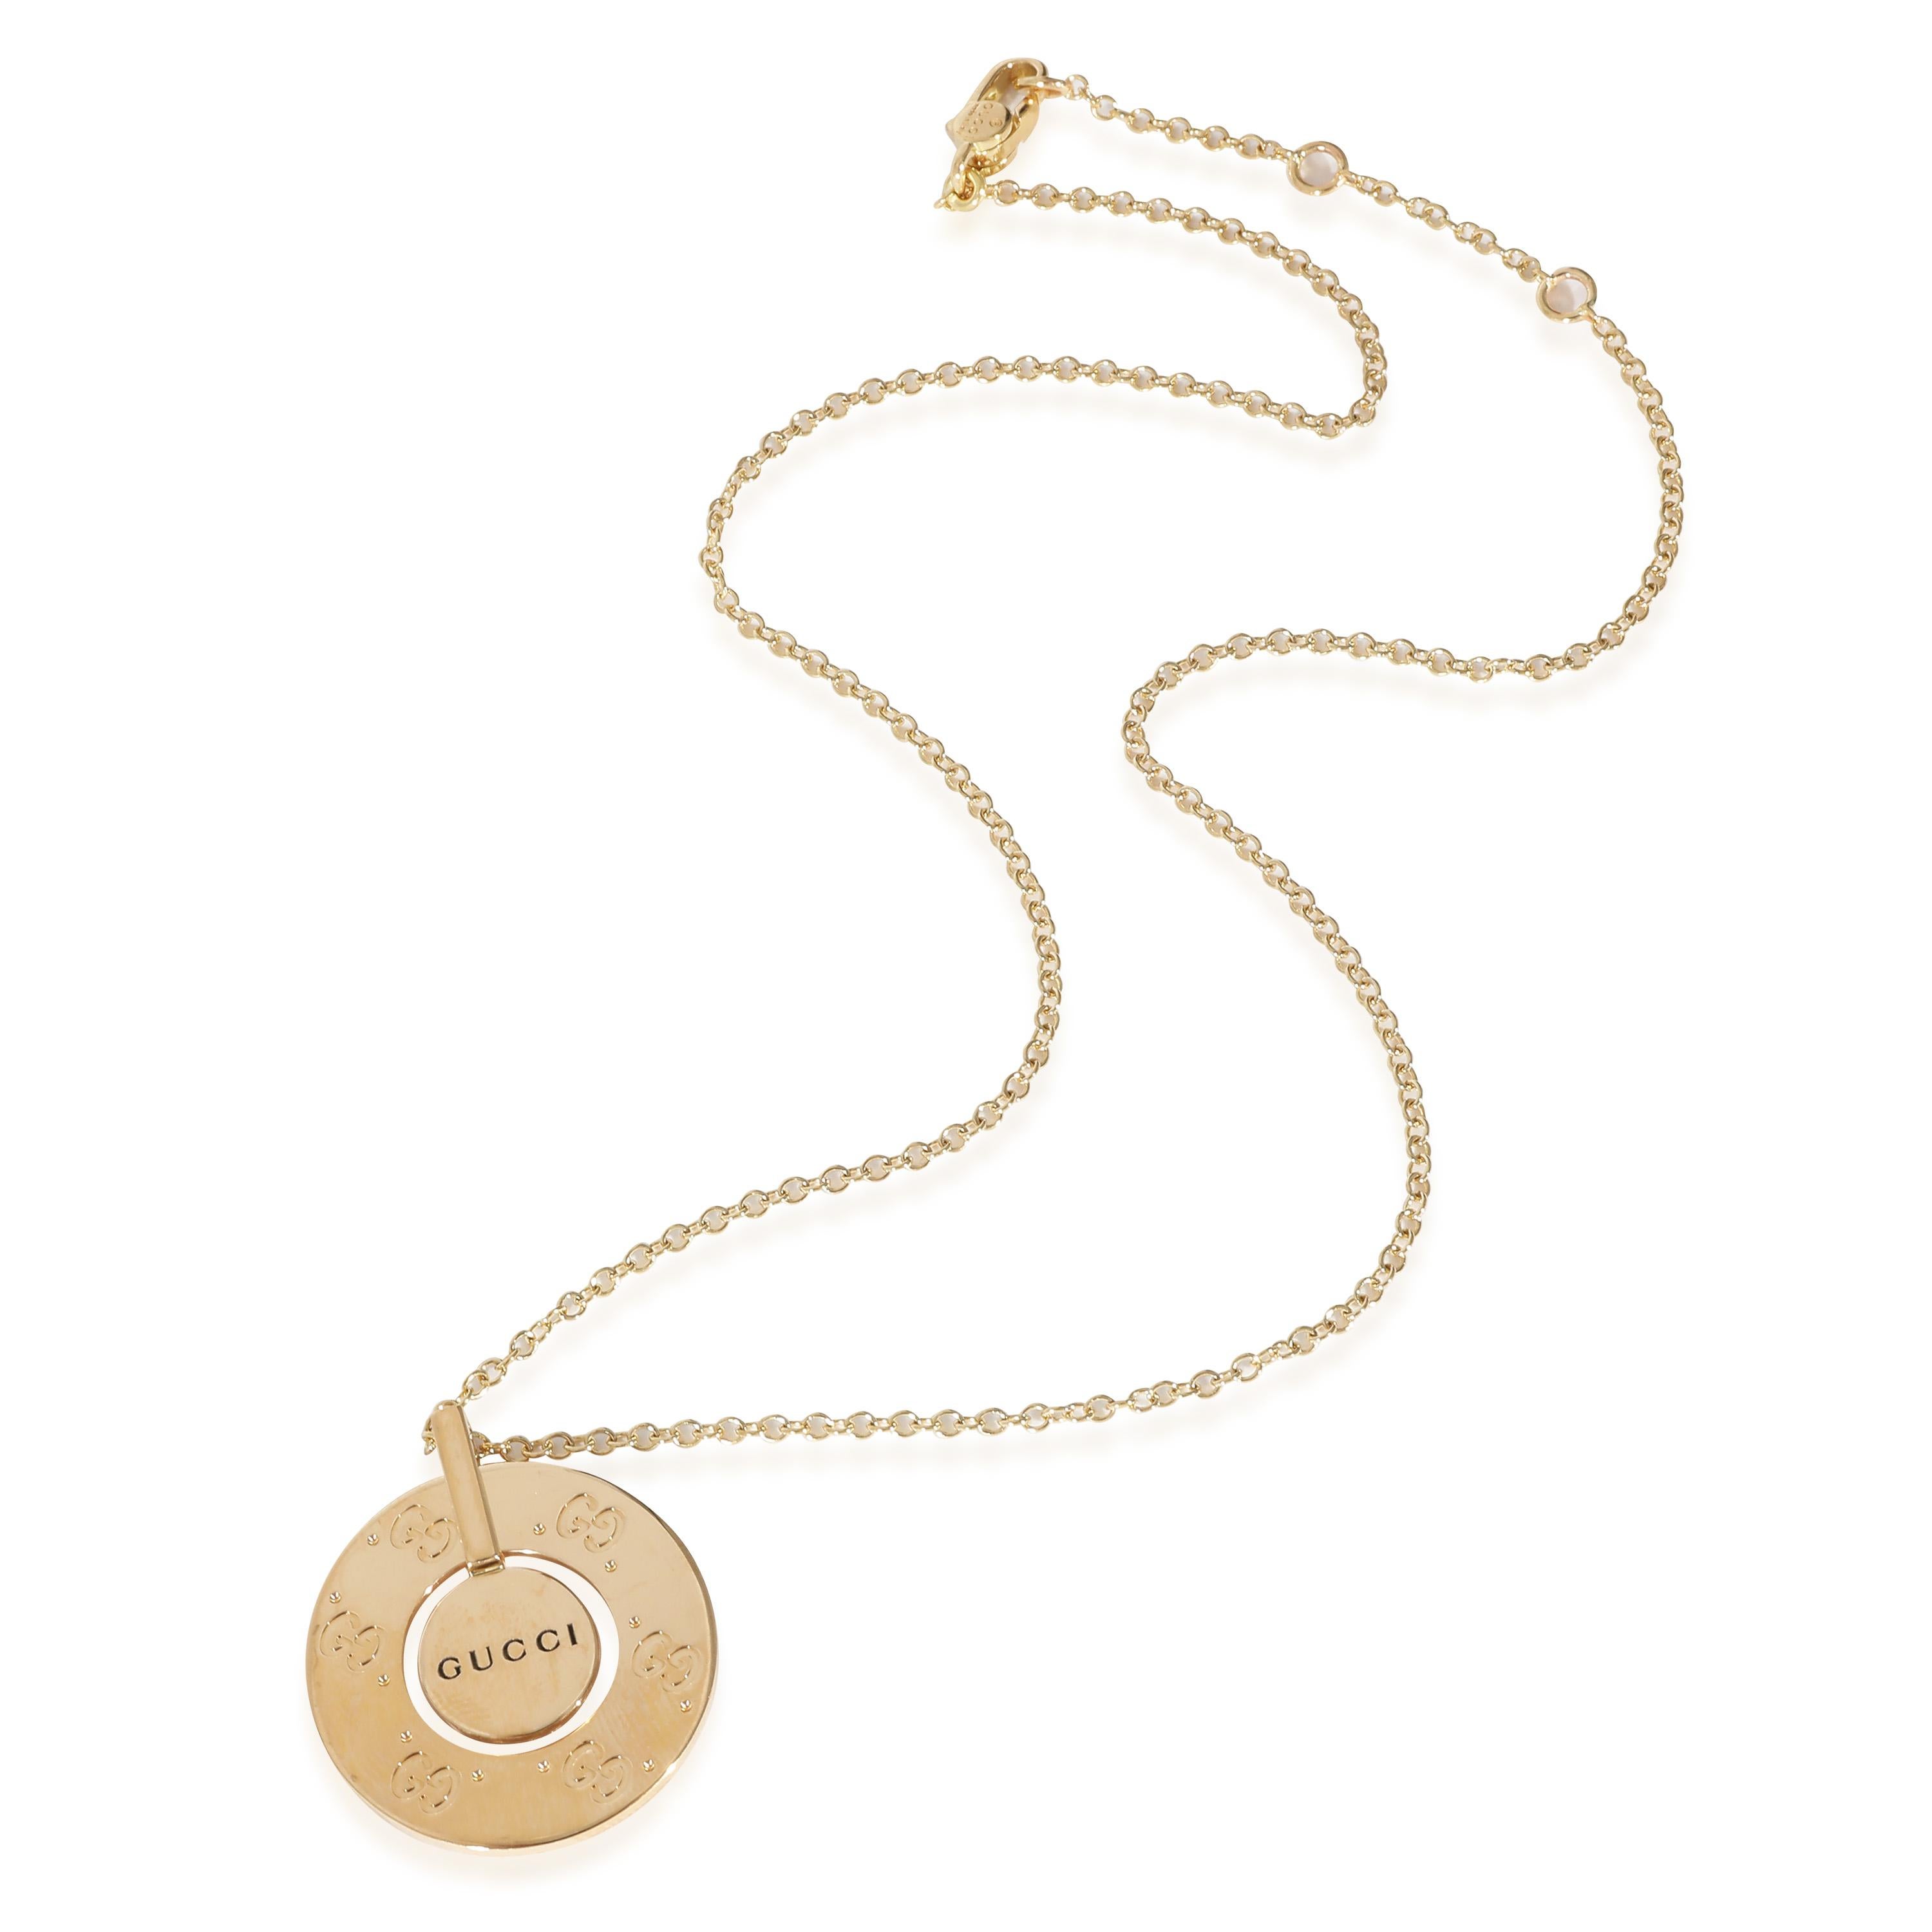 Gucci Icon Circle Pendant in 18K Yellow Gold

PRIMARY DETAILS
SKU: 135181
Listing Title: Gucci Icon Circle Pendant in 18K Yellow Gold
Condition Description: Retails for 2800 USD. In excellent condition and recently polished. 16 in in length. Comes